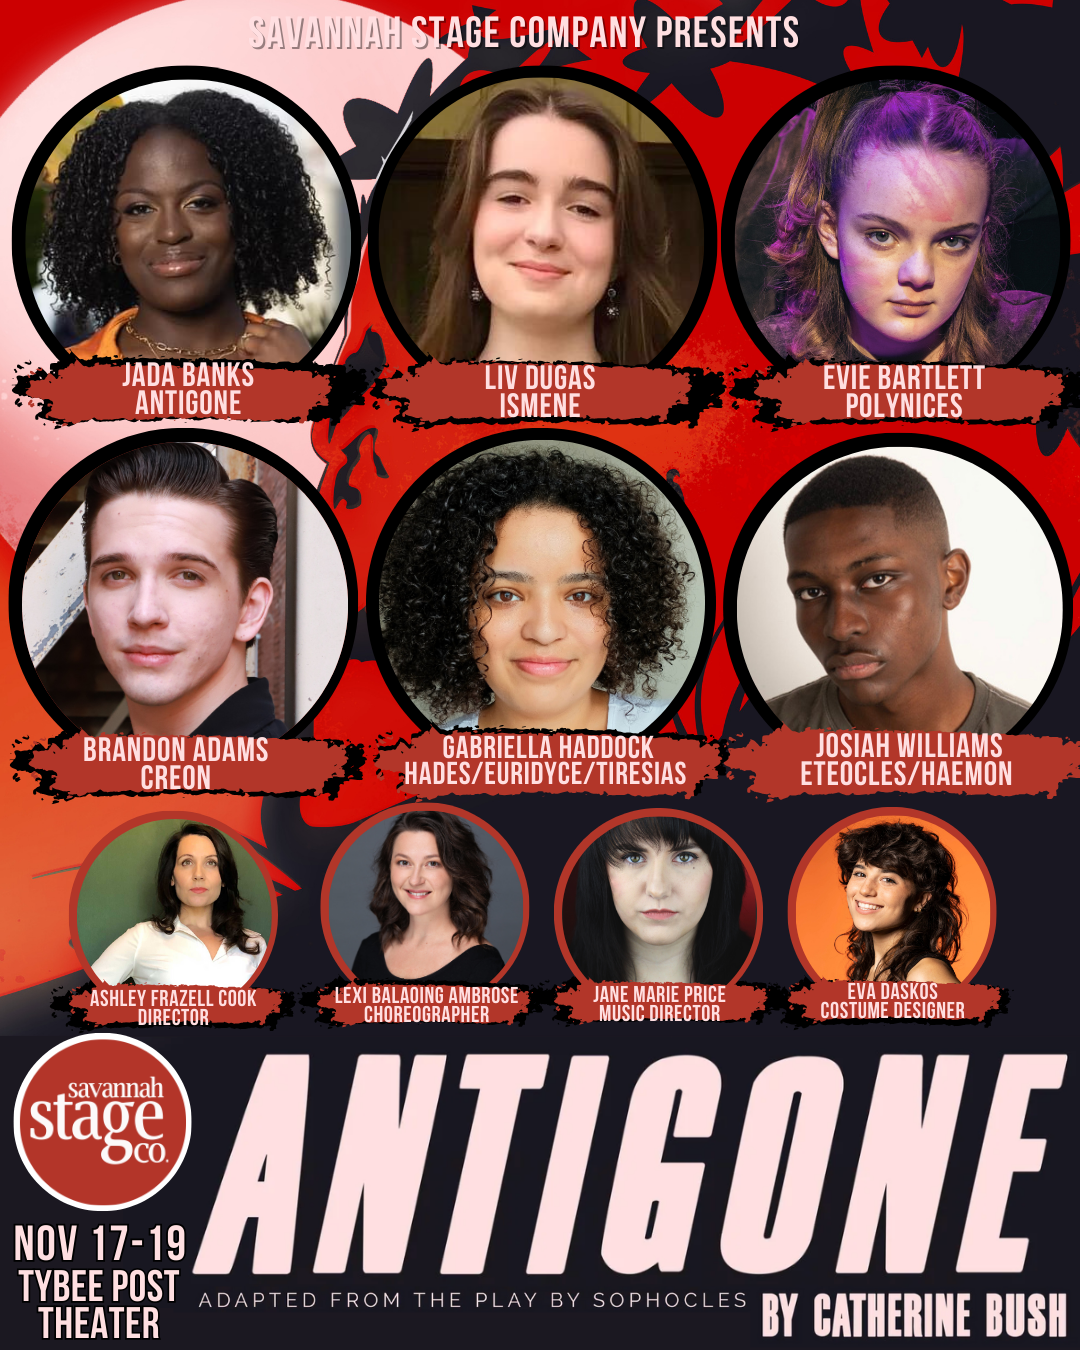 The cast of Savannah Stage Co.'s production of "Antigone"